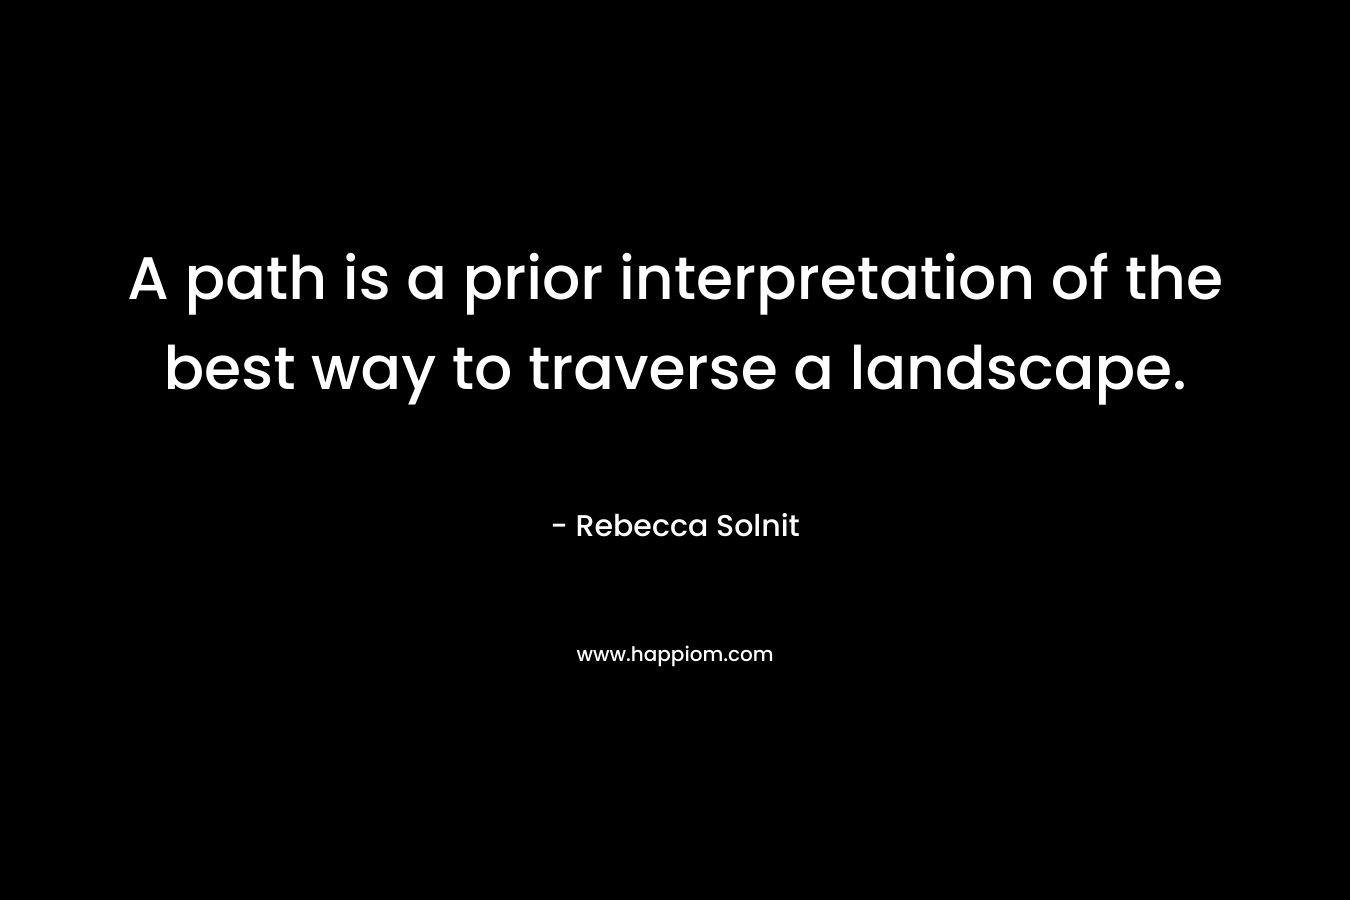 A path is a prior interpretation of the best way to traverse a landscape.